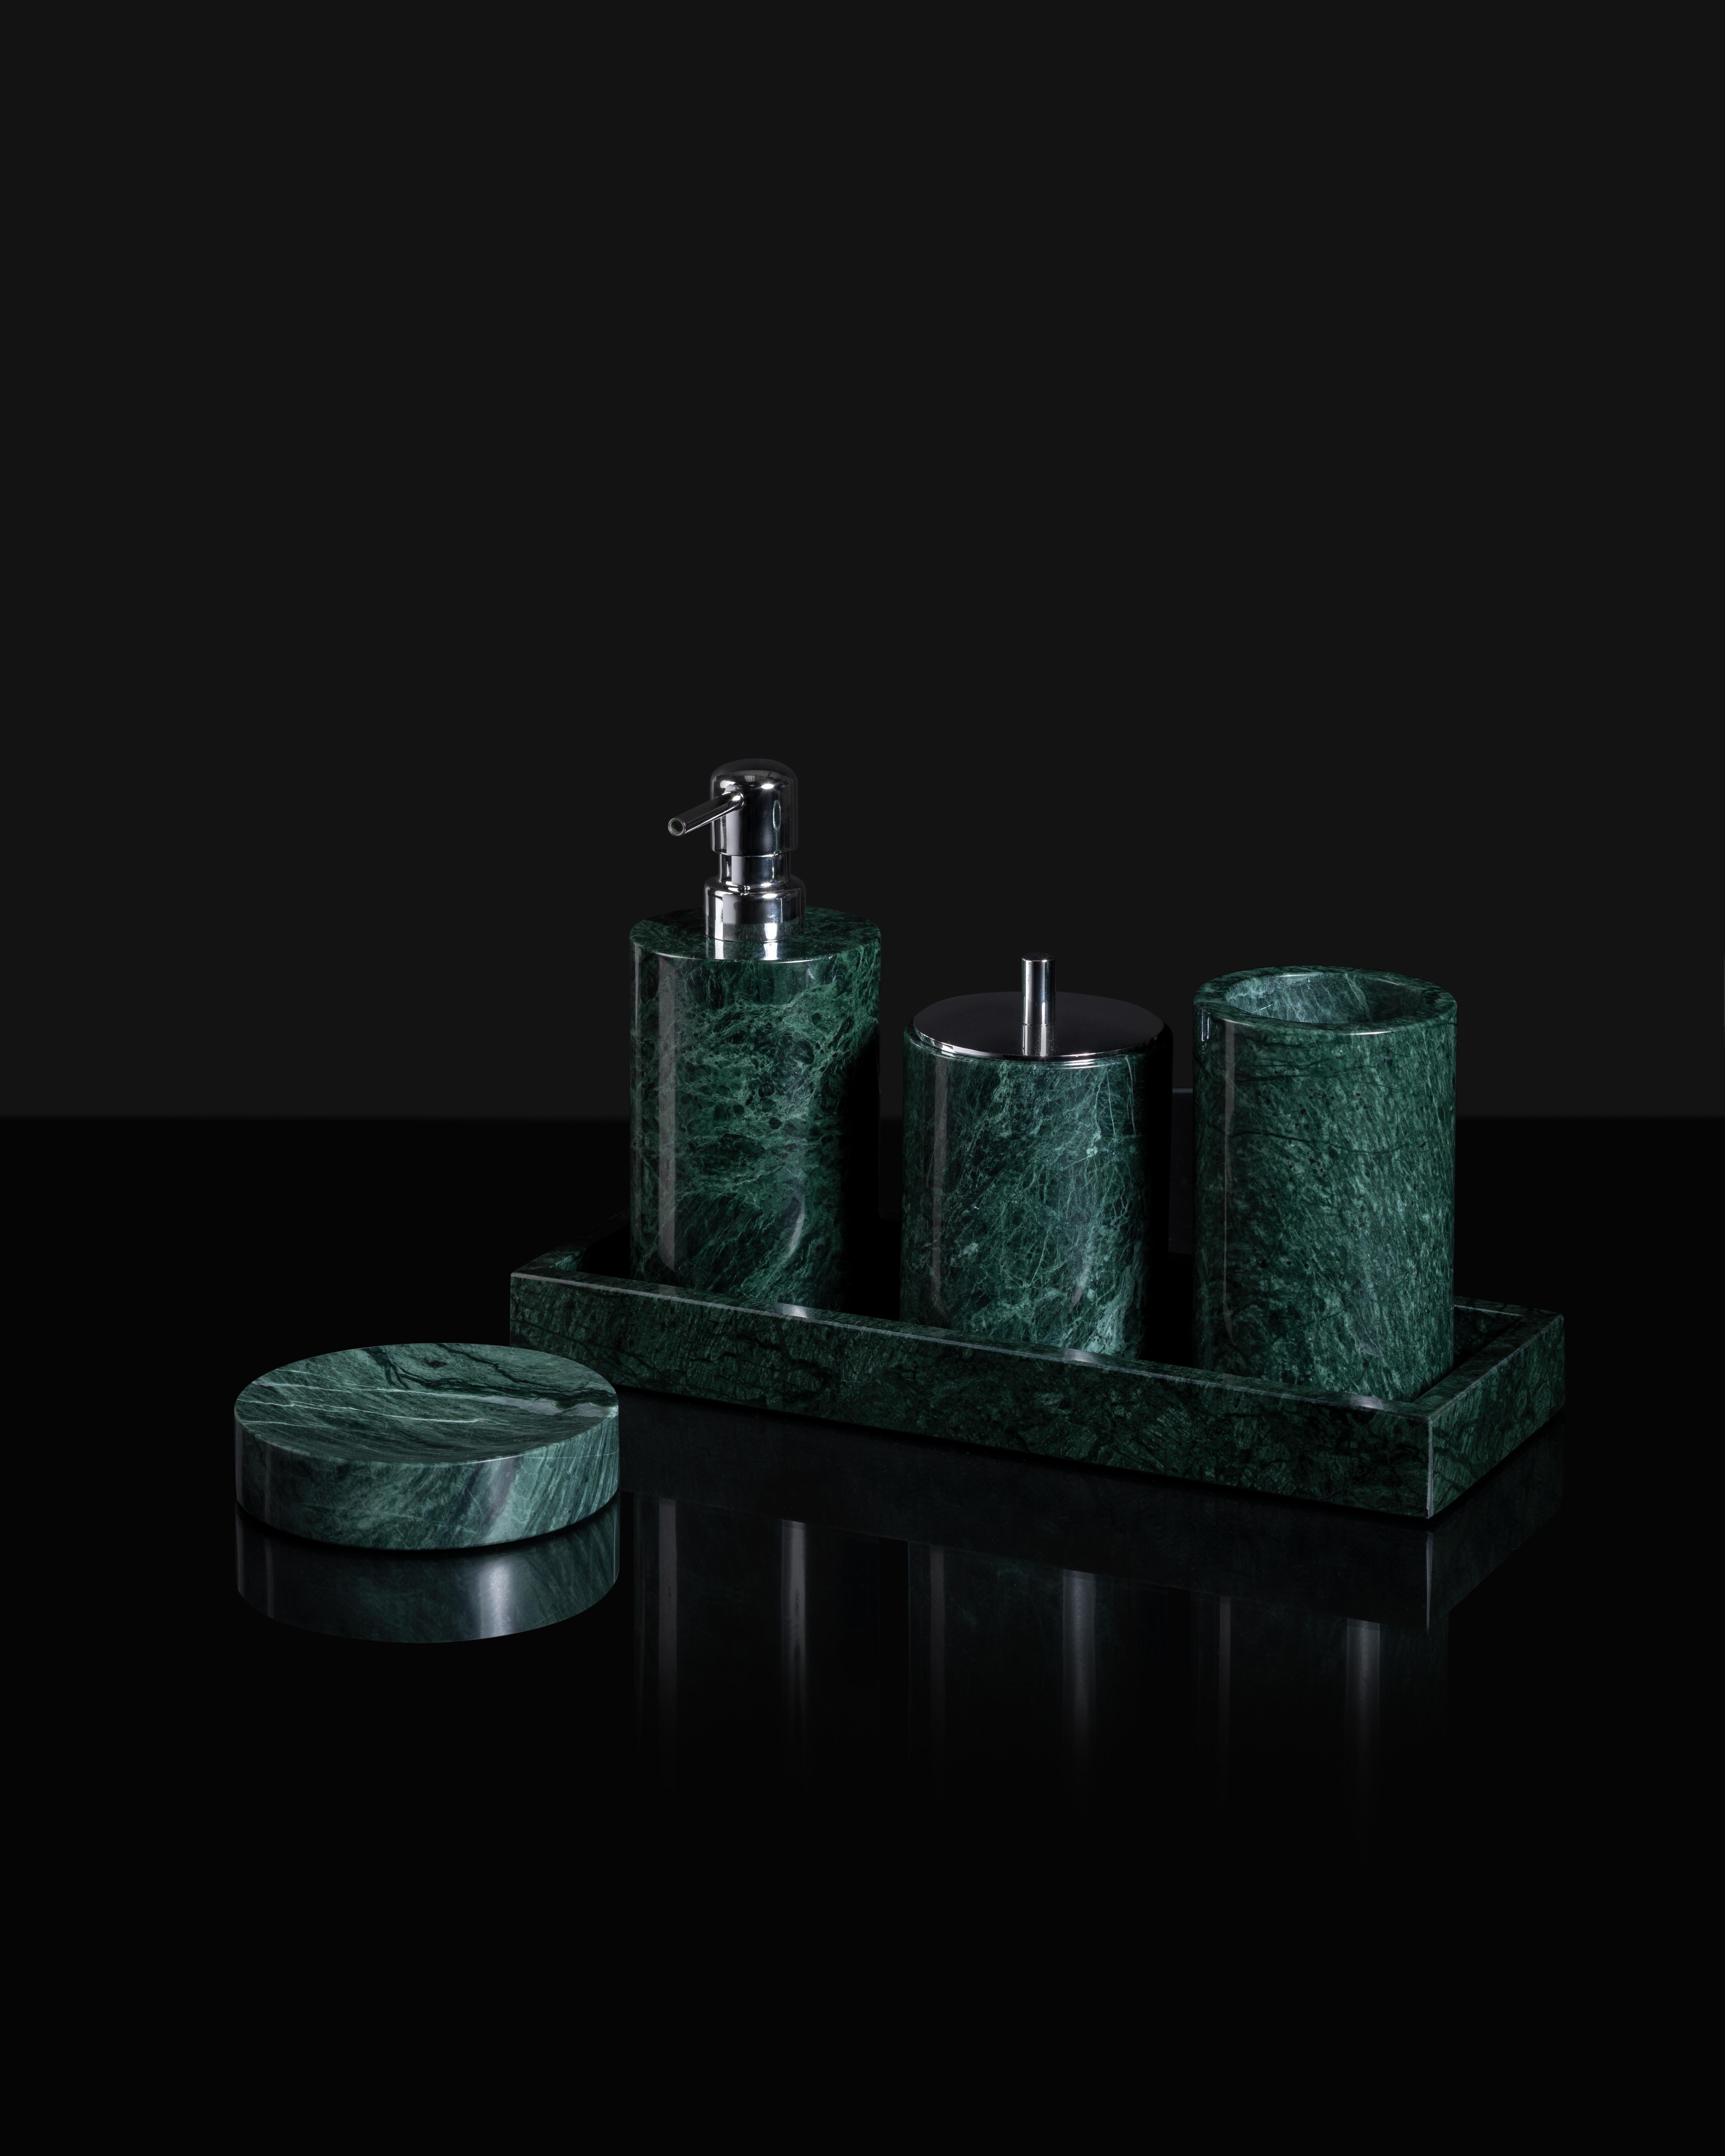 Crafted from elegant Green marble, this deluxe bathroom set is designed to enhance both the beauty and functionality of your bathroom, spa, or hotel.

The bathroom set contains a rectangular tray, soap dispenser, soap dish, toothbrush holder, and